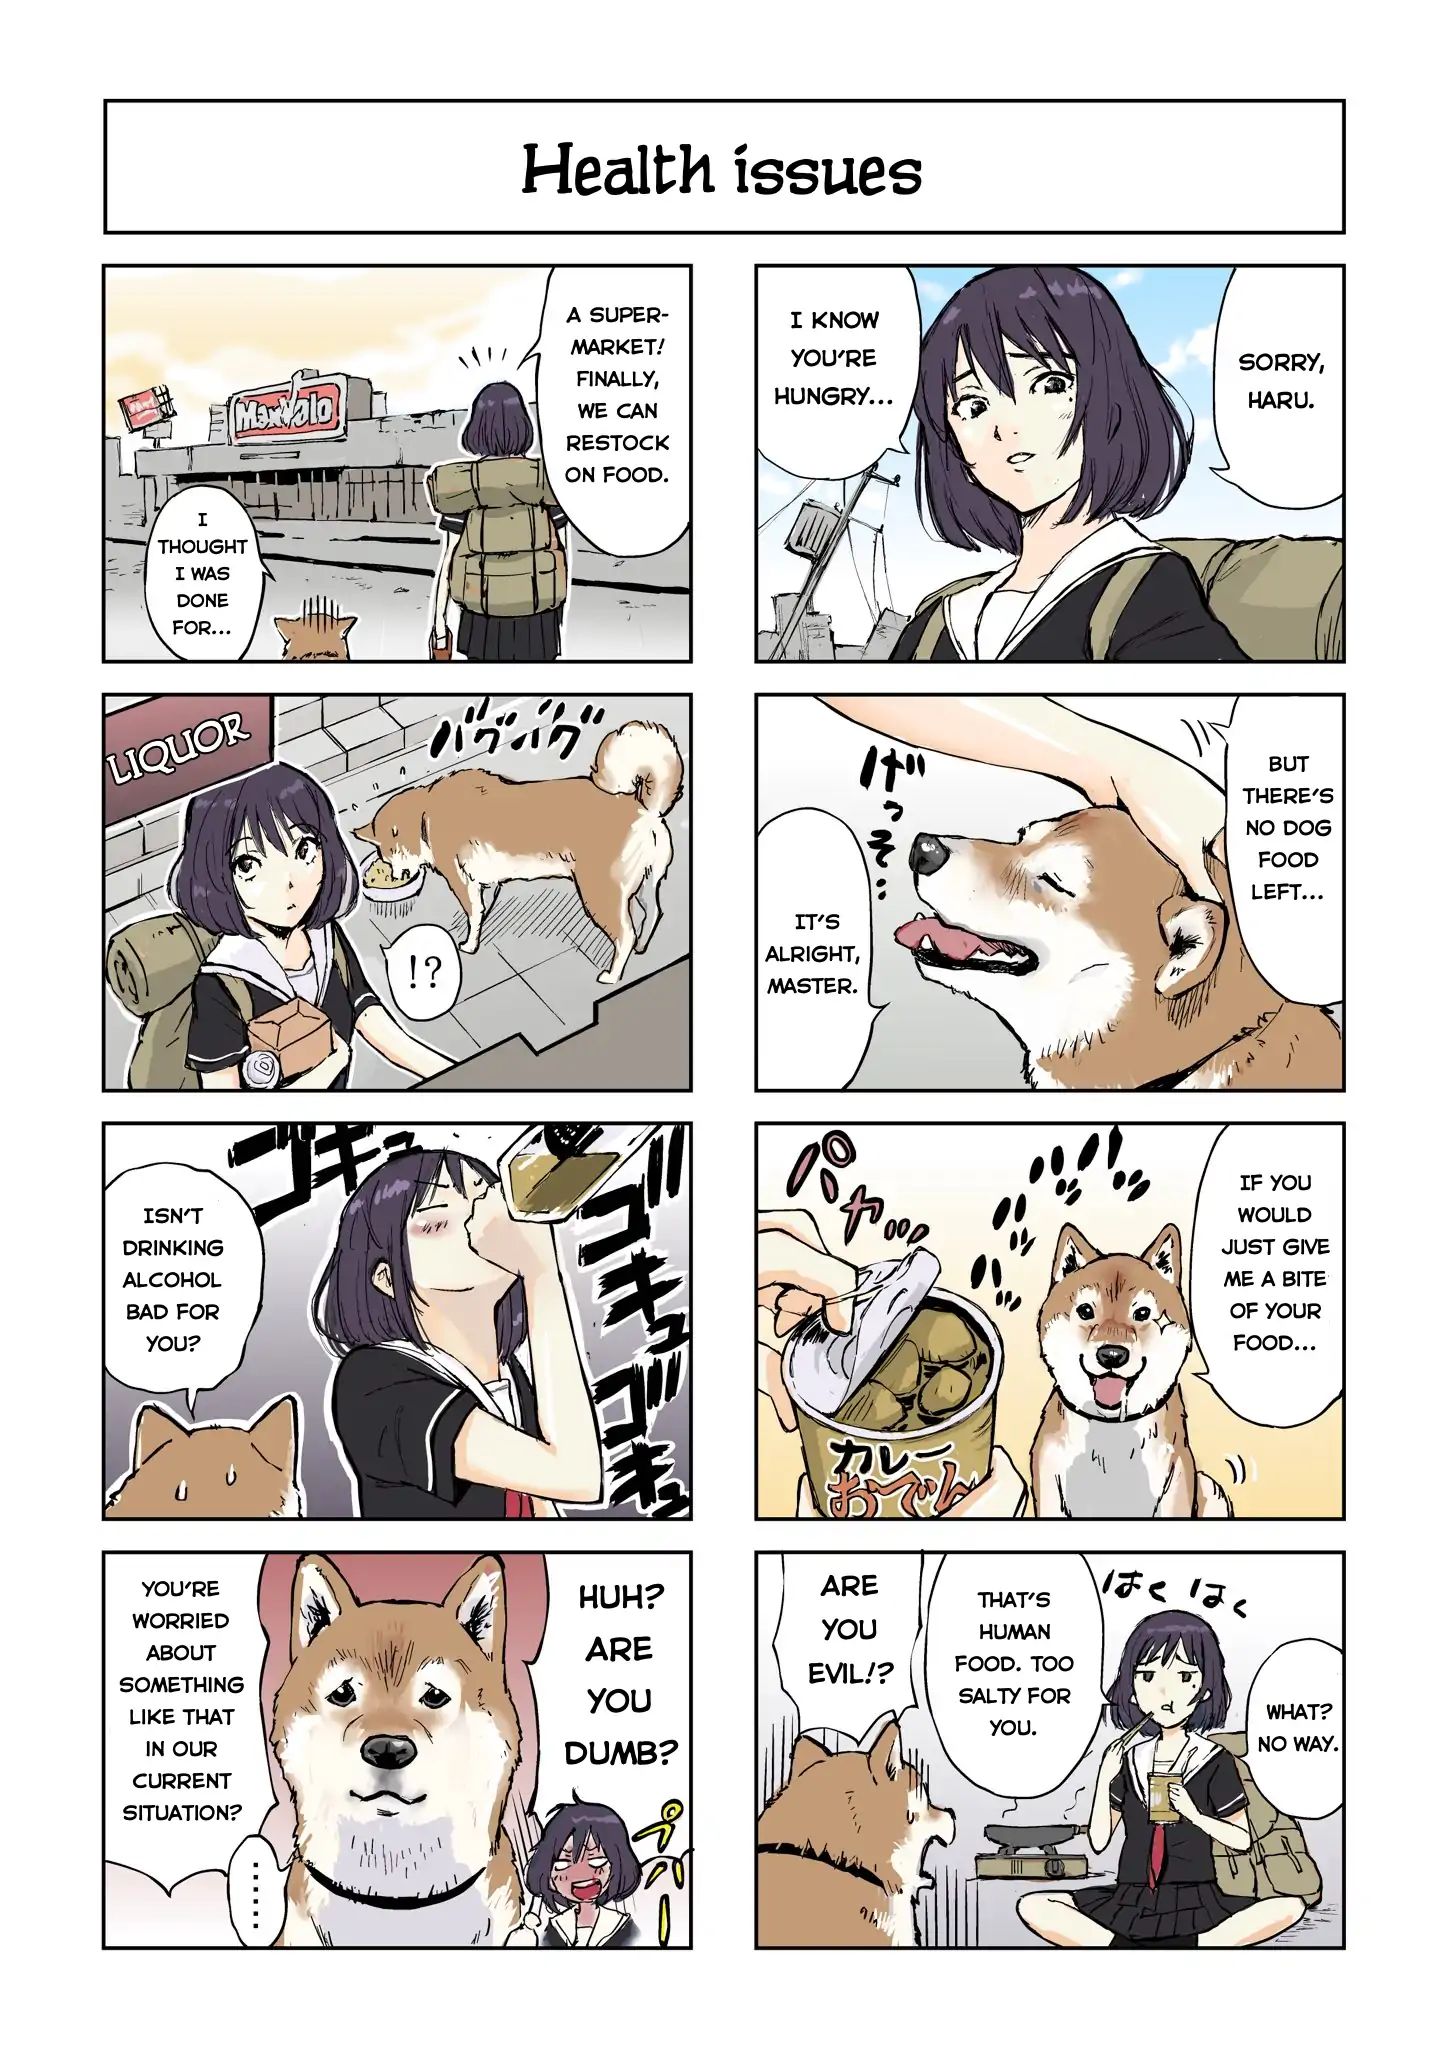 Roaming The Apocalypse With My Shiba Inu - chapter 1 - #2